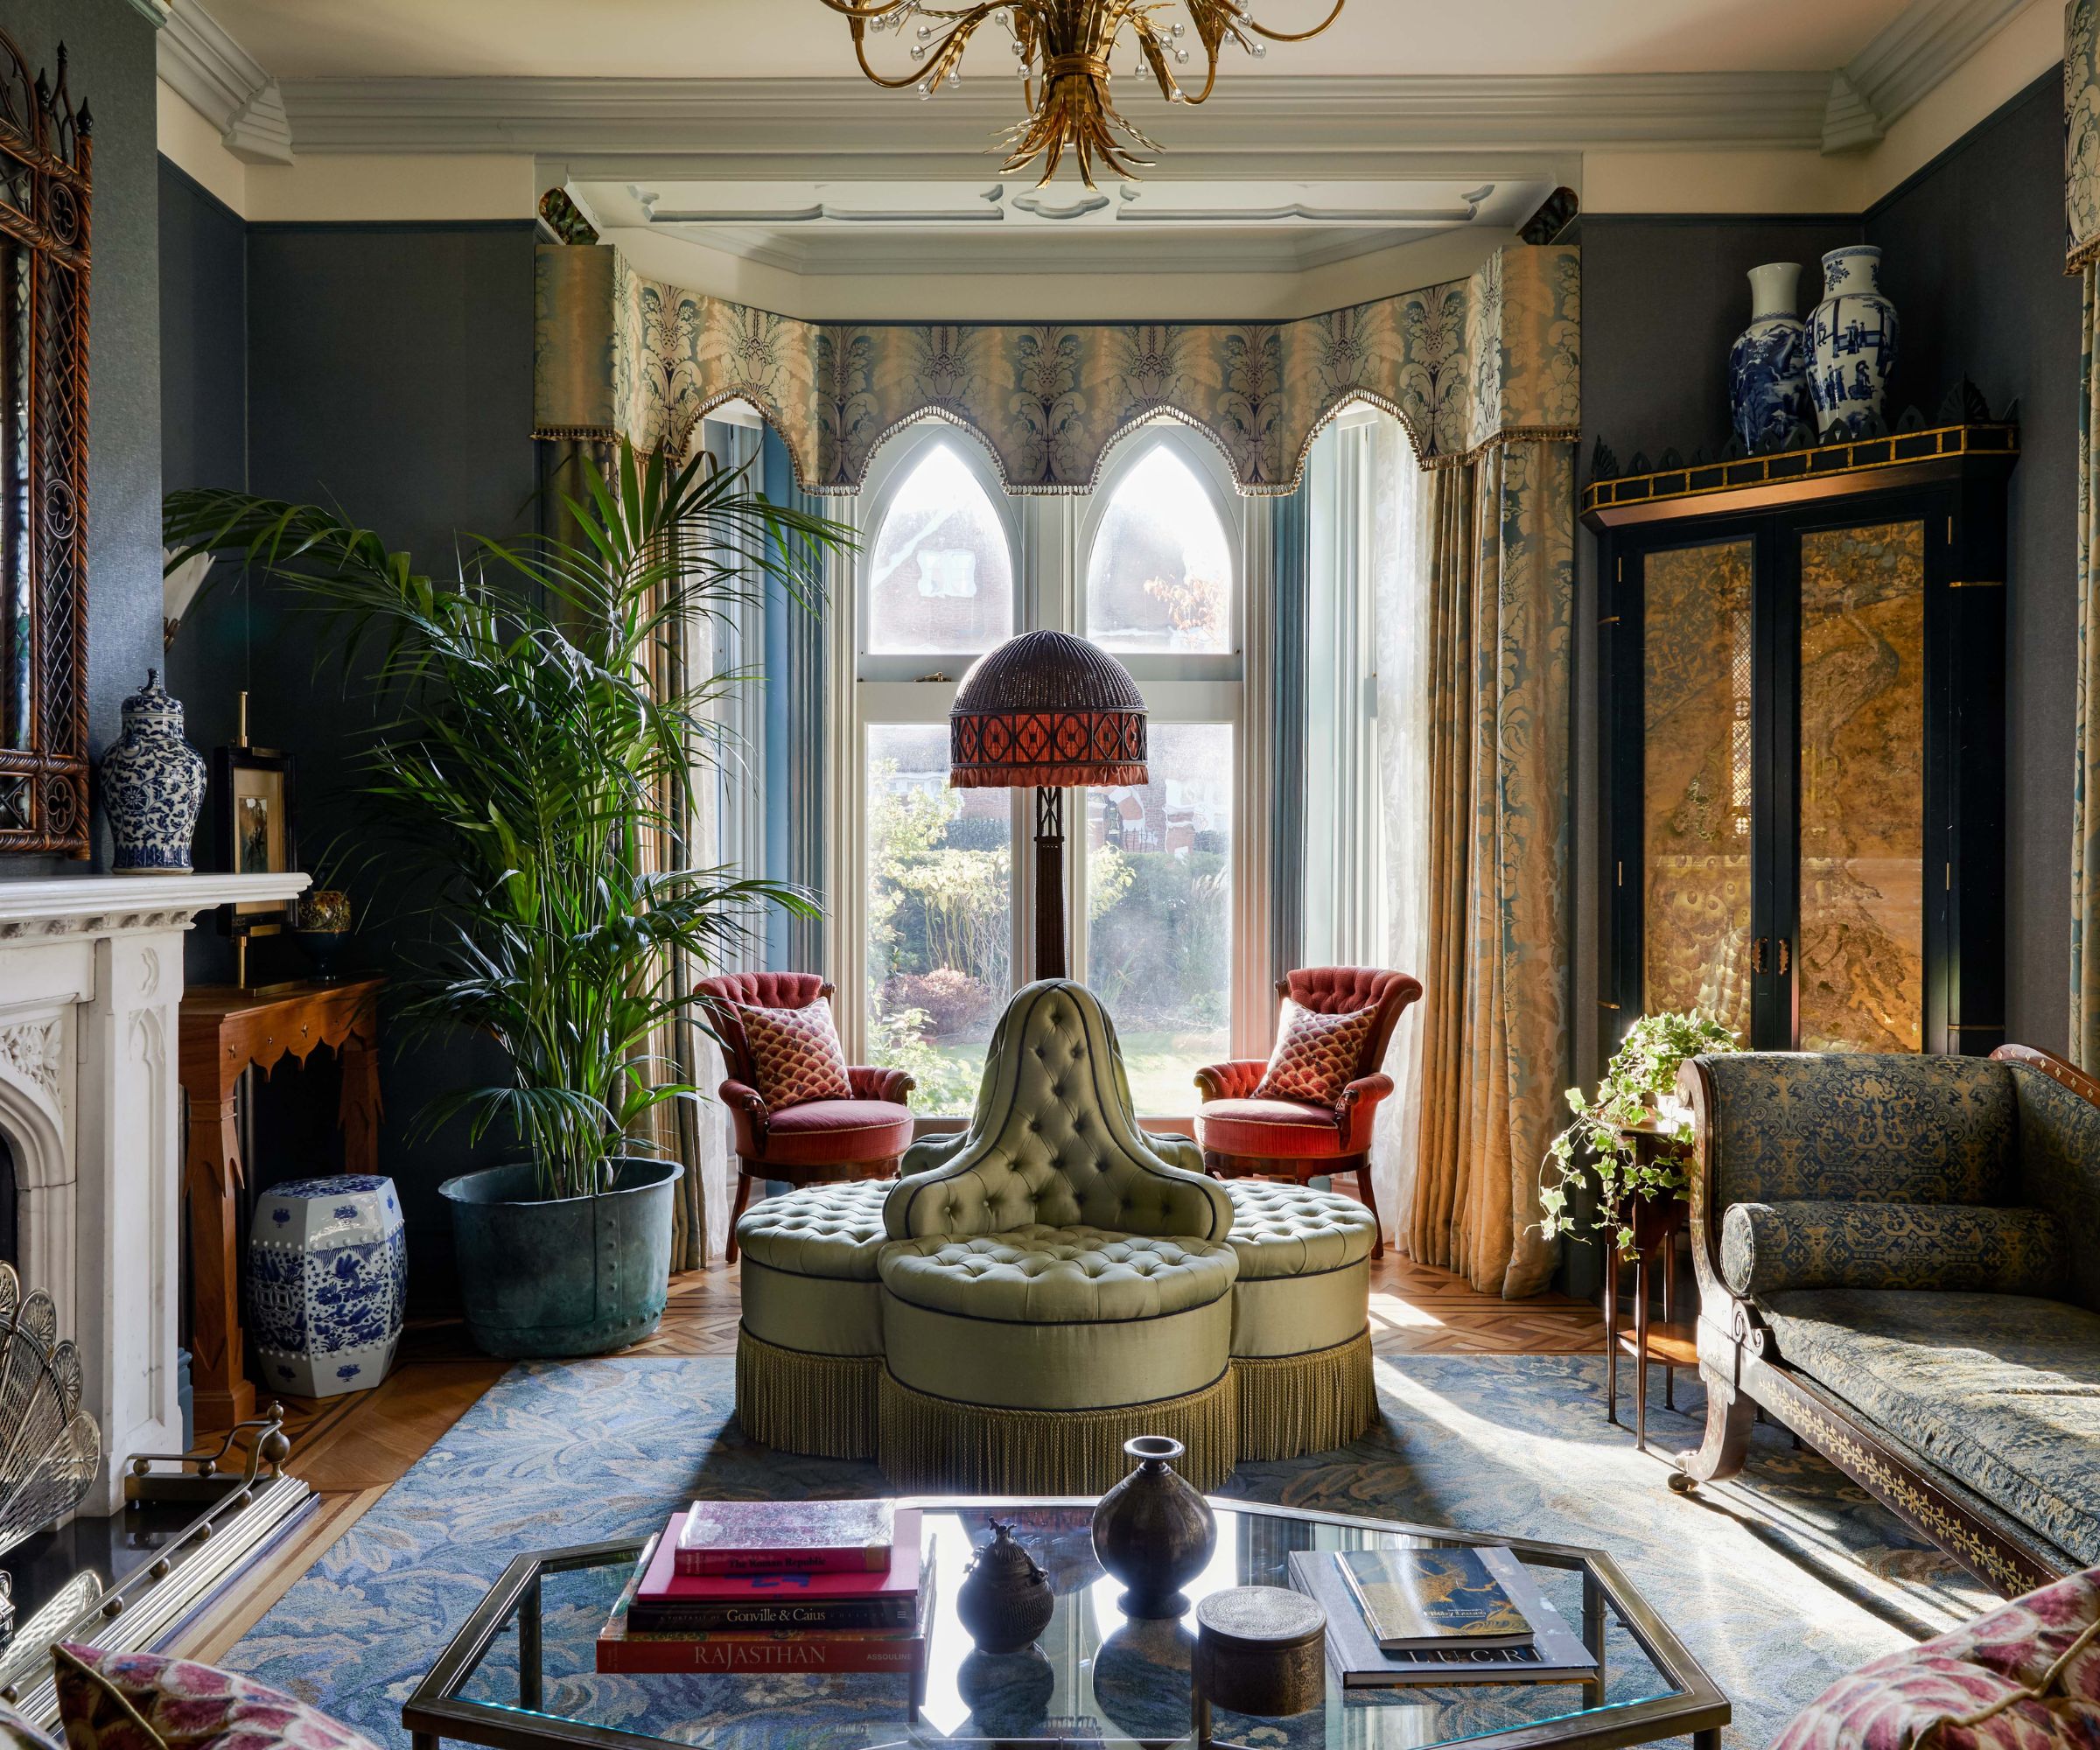 Gothic style living room